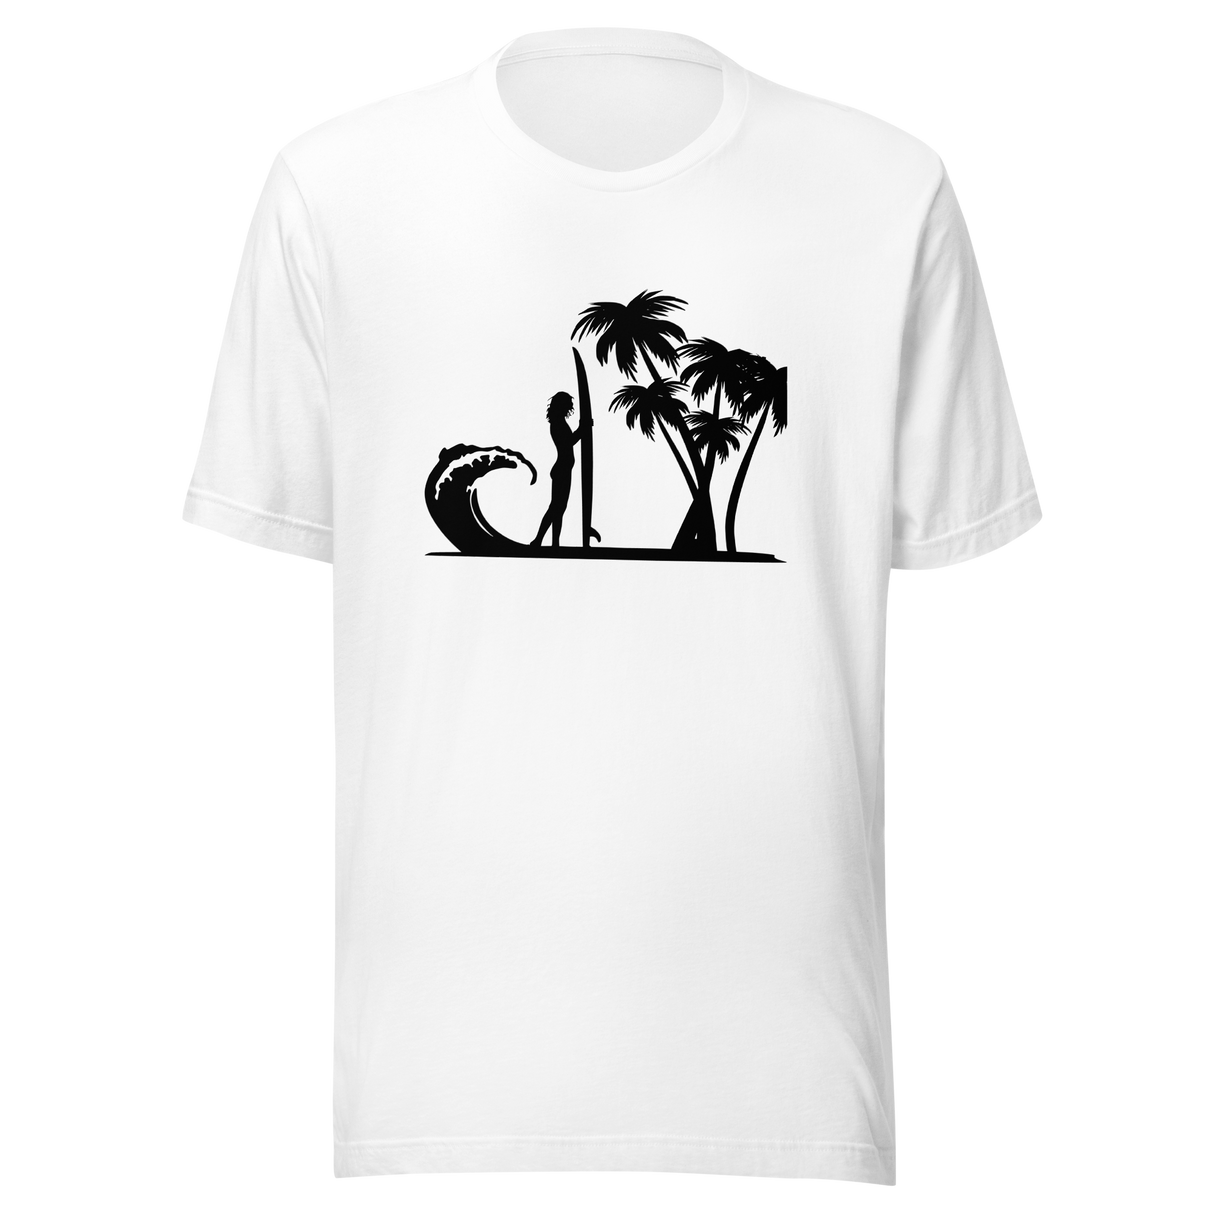 surfer-standing-on-beach-with-wave-and-palm-trees-surf-tee-beach-t-shirt-surfer-tee-beach-t-shirt-surfing-tee#color_white